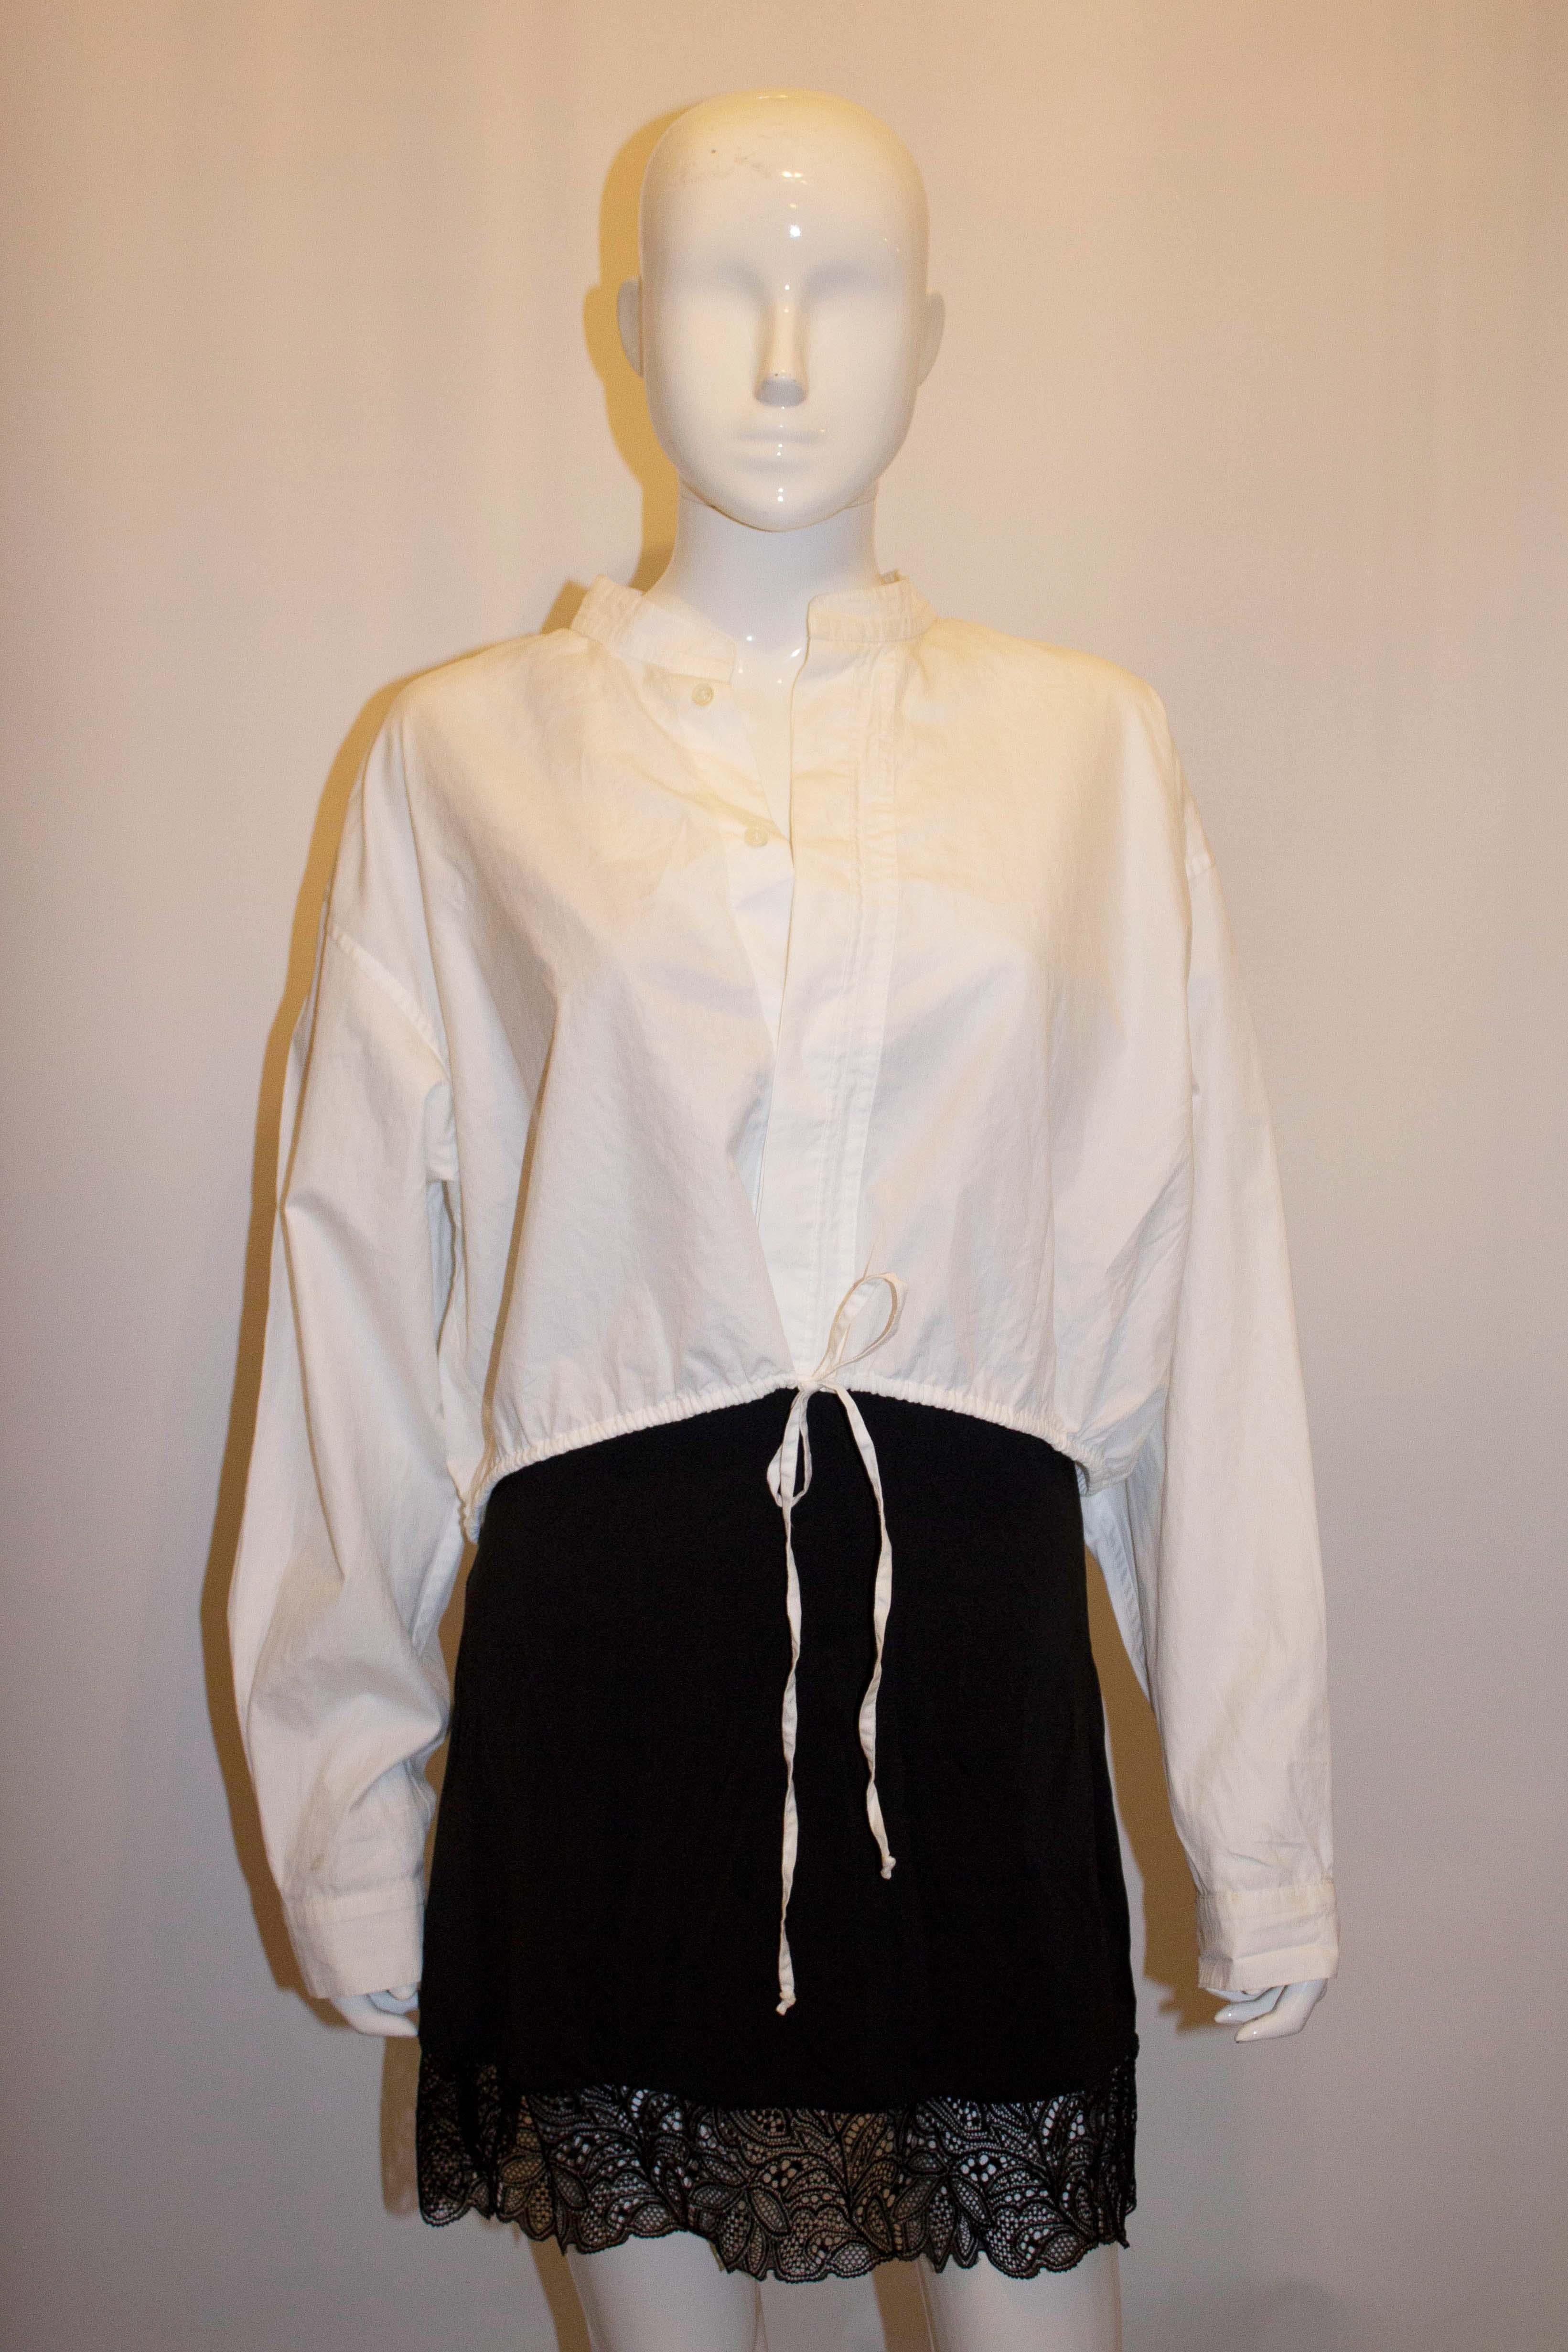 A chic cotton top by Haider Ackermann. Made in white cotton , the top has a drawstring waist, stand up collar and hidden button opening. Size 38, made in Belgium
Measurements: Bust up to 42'', length 13''